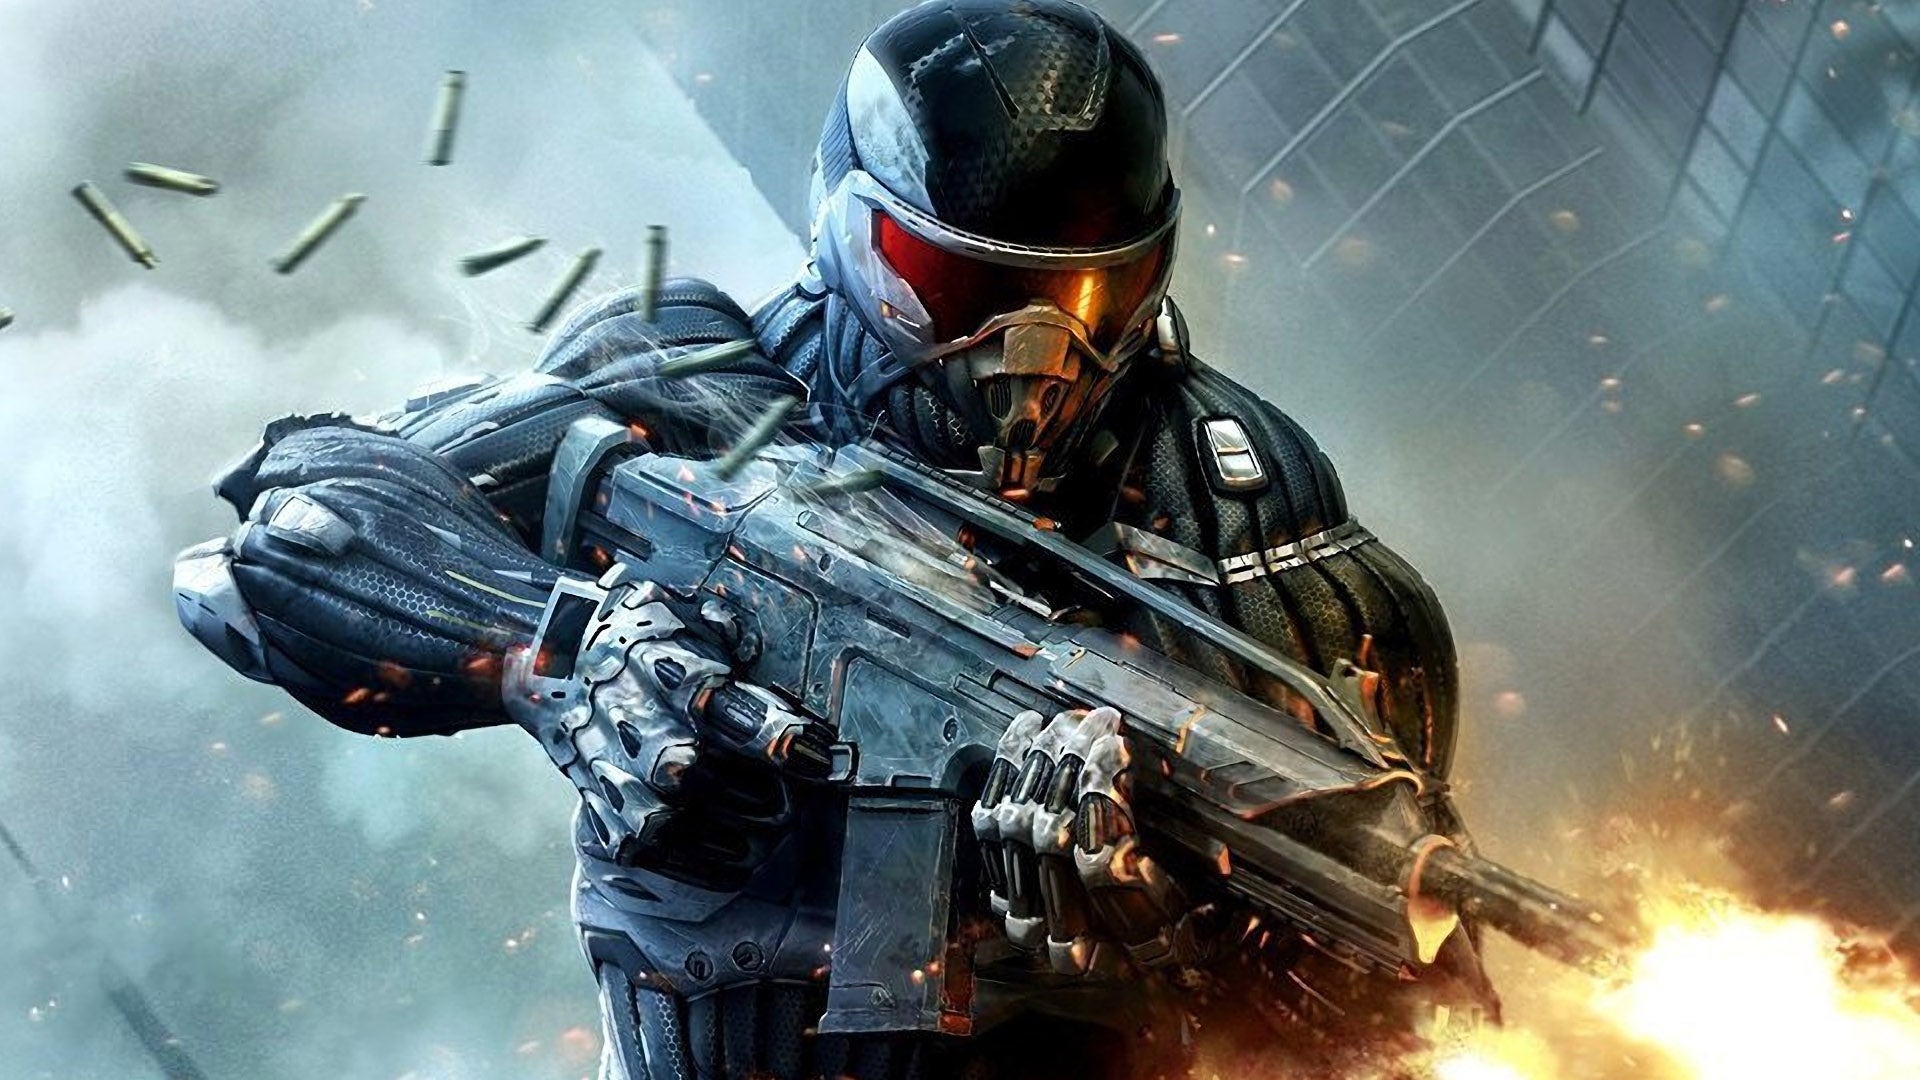 Image for Crysis 2 + Crysis 3 Remastered PC Deep Dive - Every Enhancement Detailed + Tested!